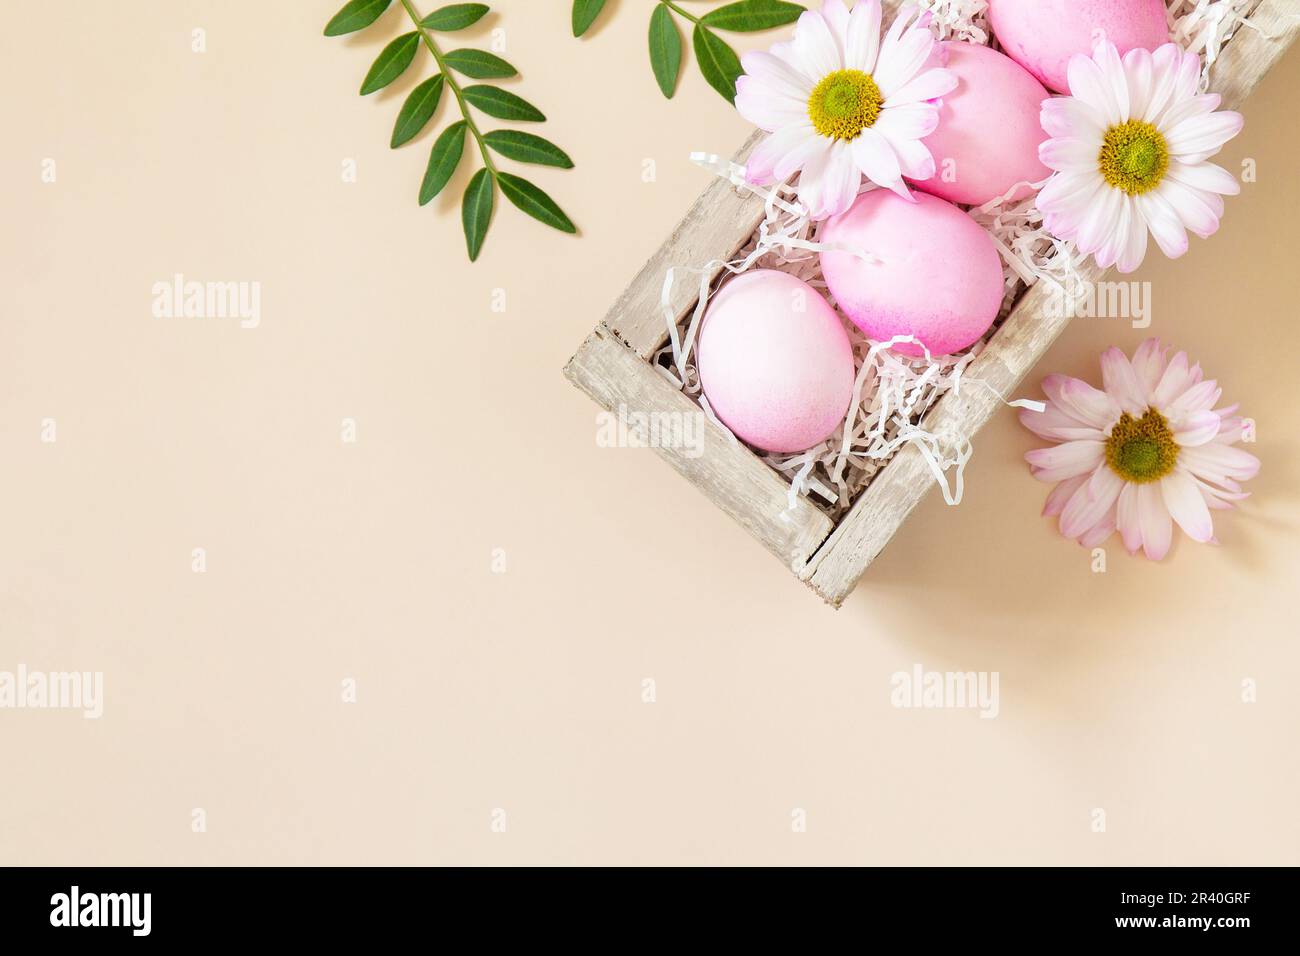 The minimum concept of Easter. Easter Eggs painted pink eggs on trendy pastel background. Top view flat lay. Stock Photo